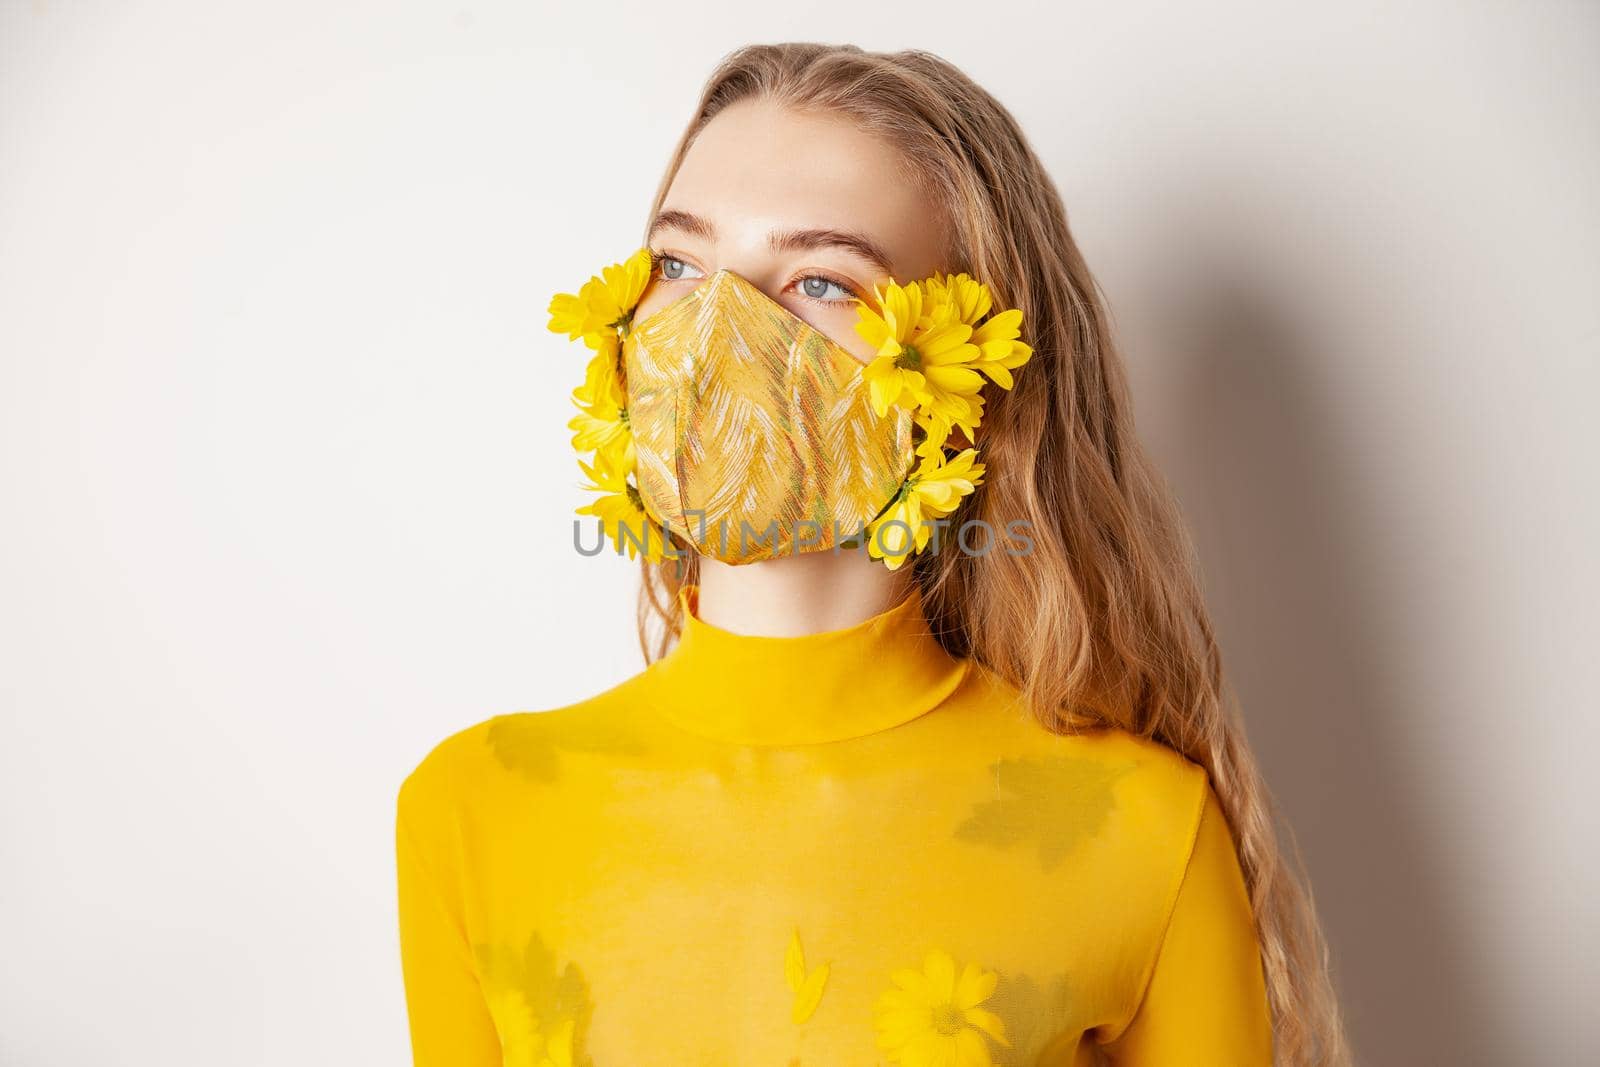 Slim female model in protective mask with fresh yellow flowers standing in transparent outfit on white background in studio